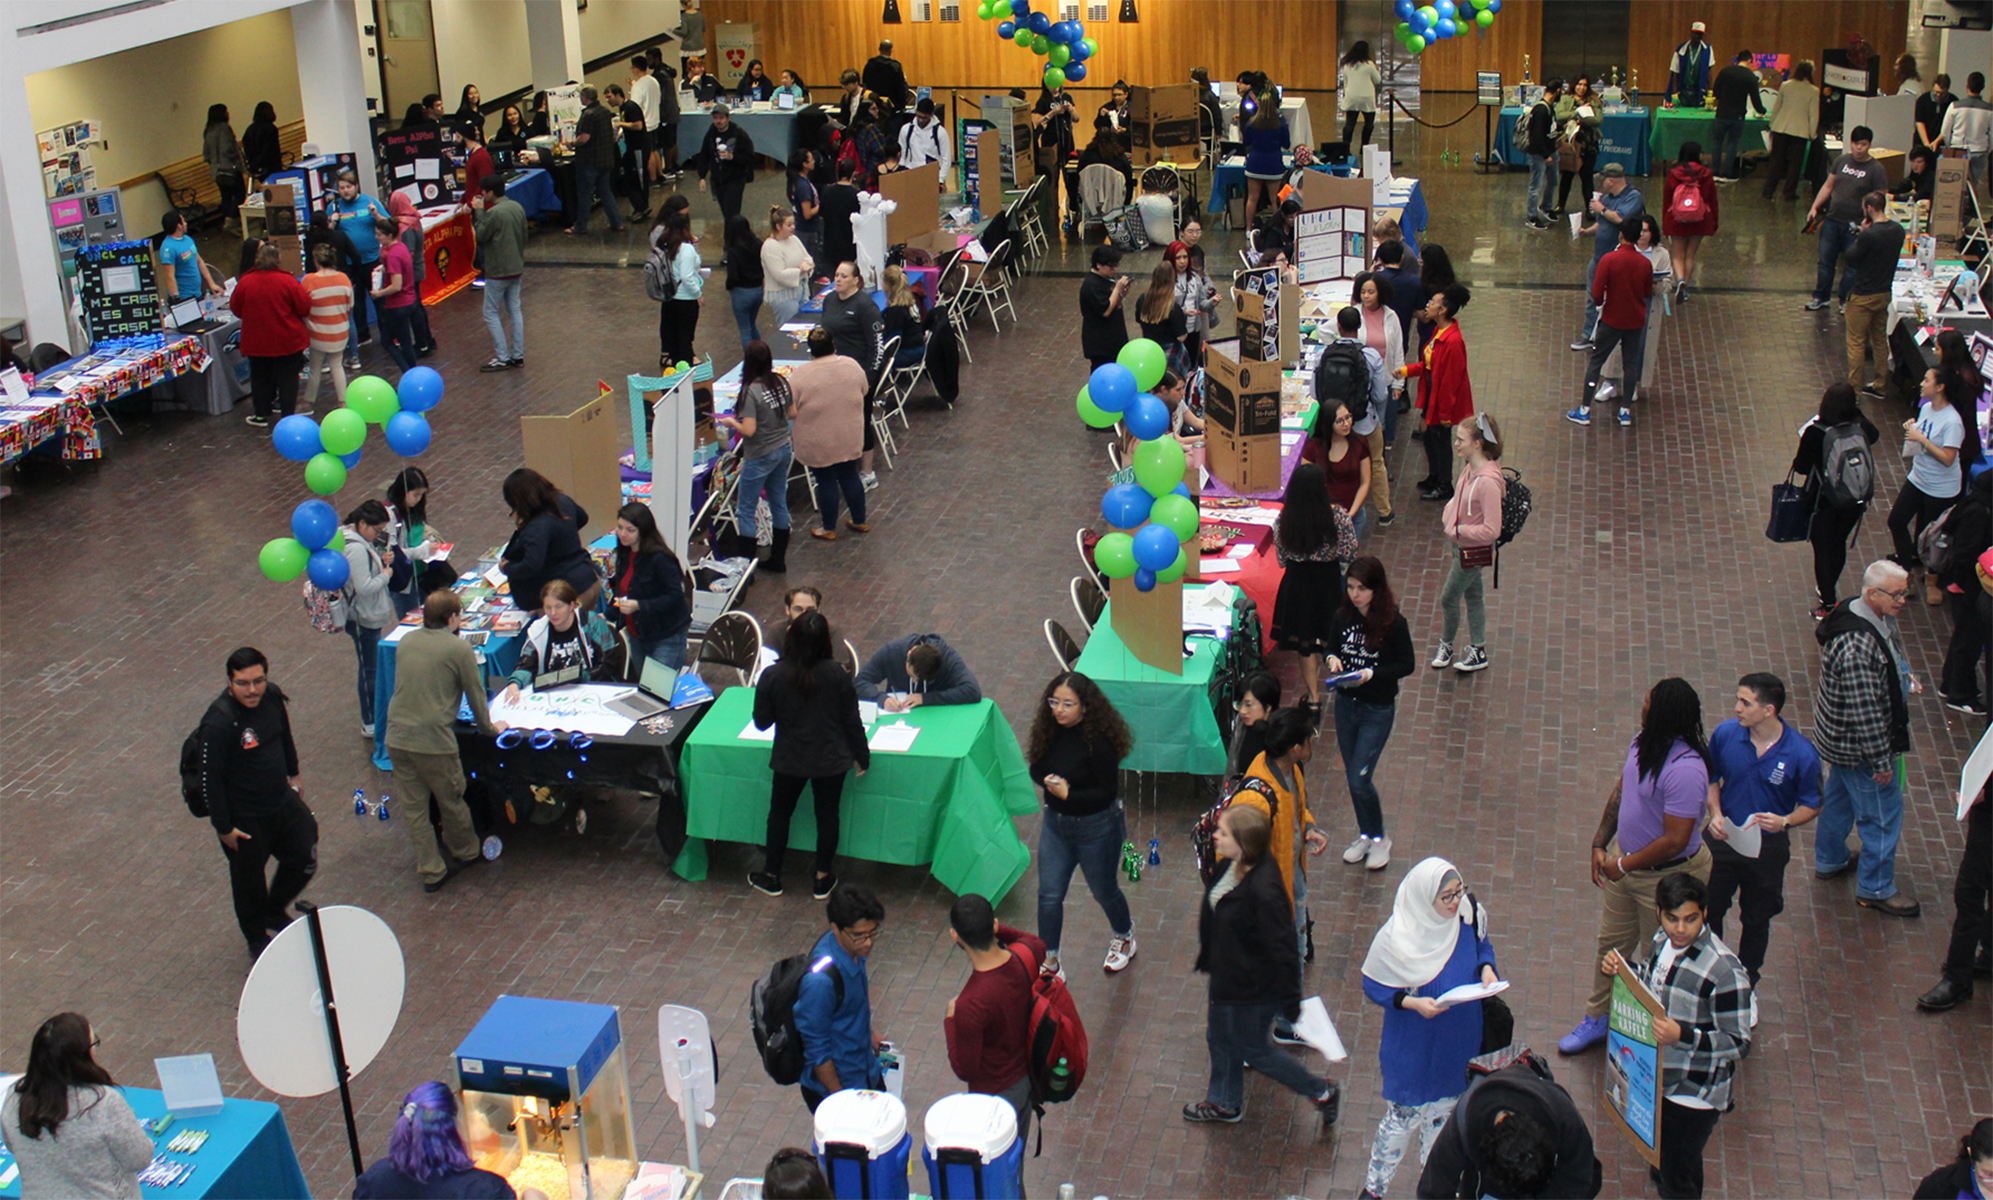 PHOTO: Student organization expo, viewed from the second floor of the school. Photo by: The Signal reporter Aimee Kubena.